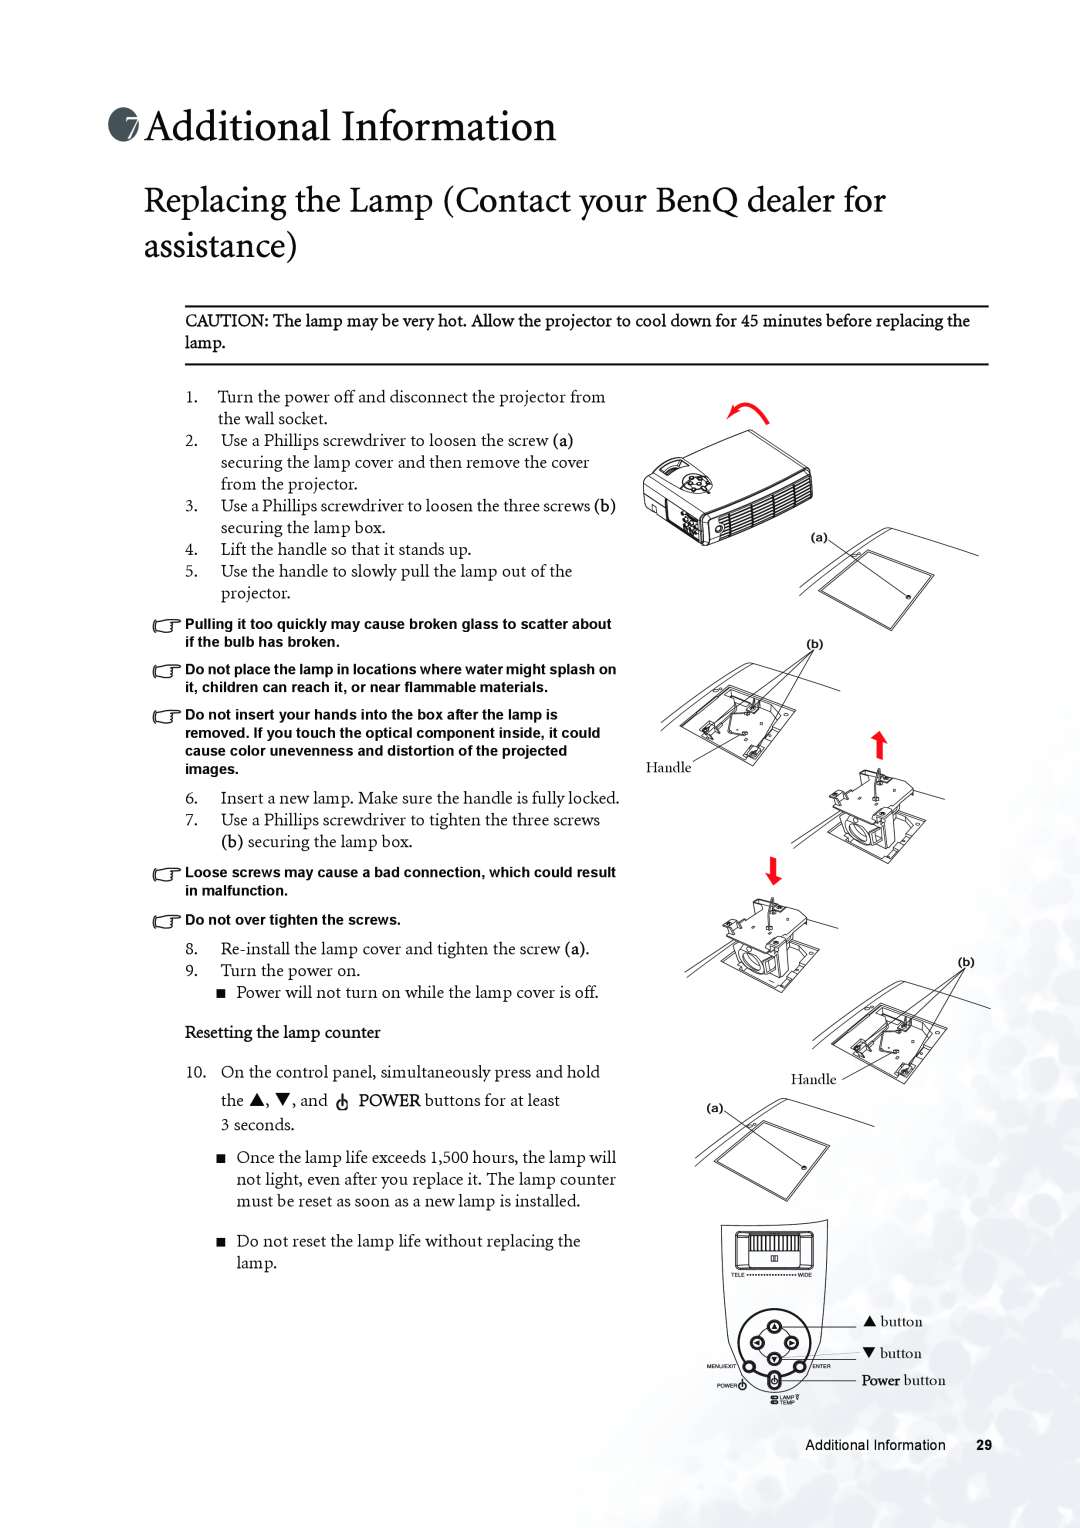 BenQ PE6800 user manual Additional Information, Resetting the lamp counter 